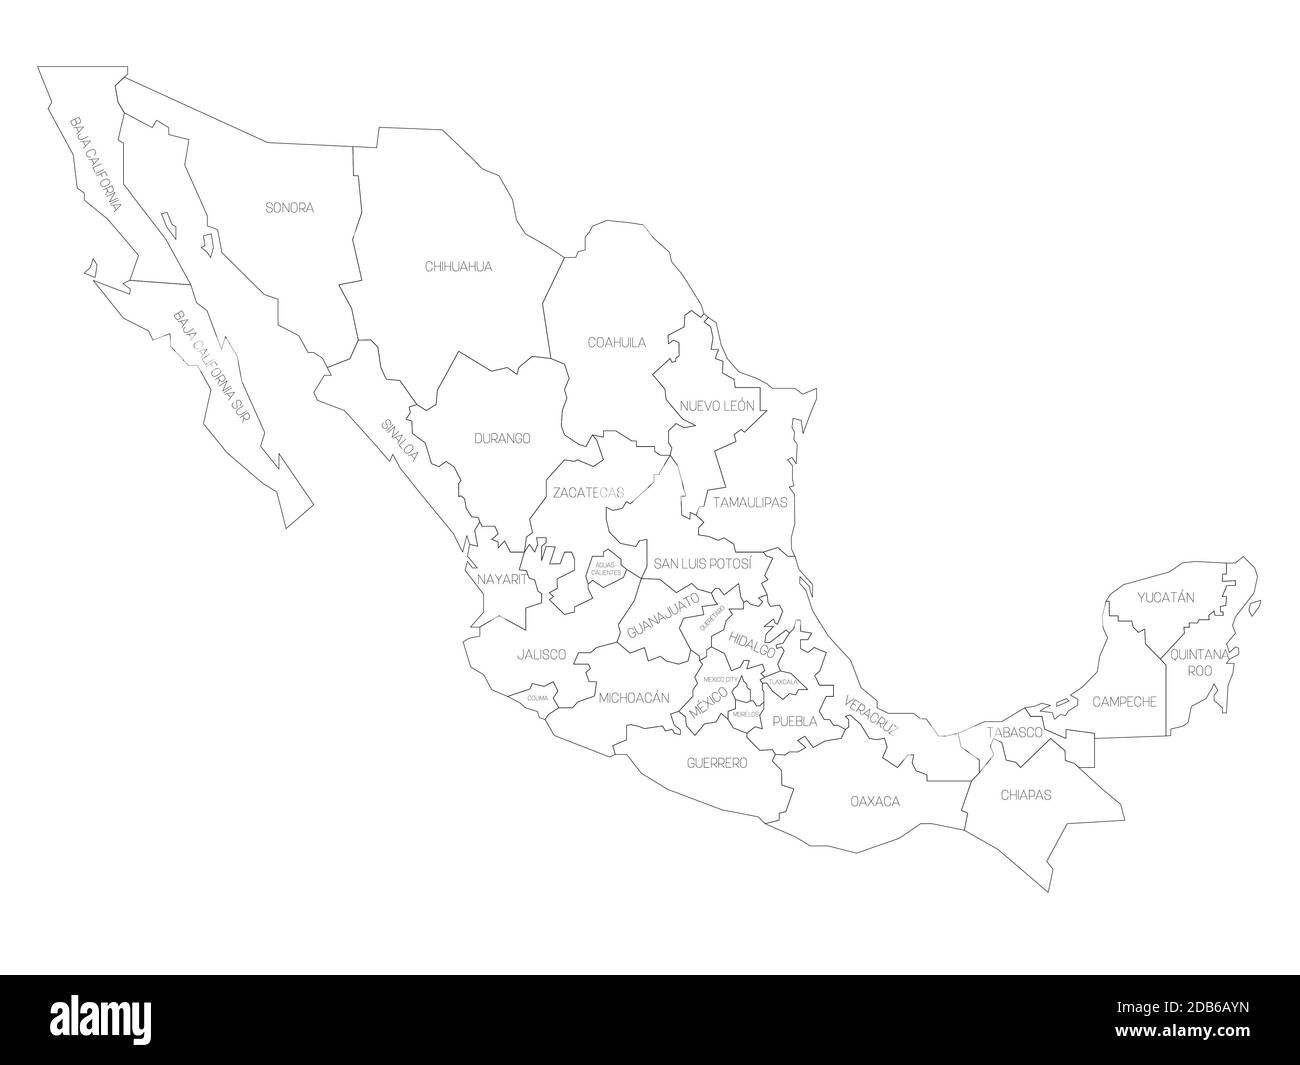 Black outline political map of Mexico. Administrative divisions - states. Simple vector map with labels. Stock Vector